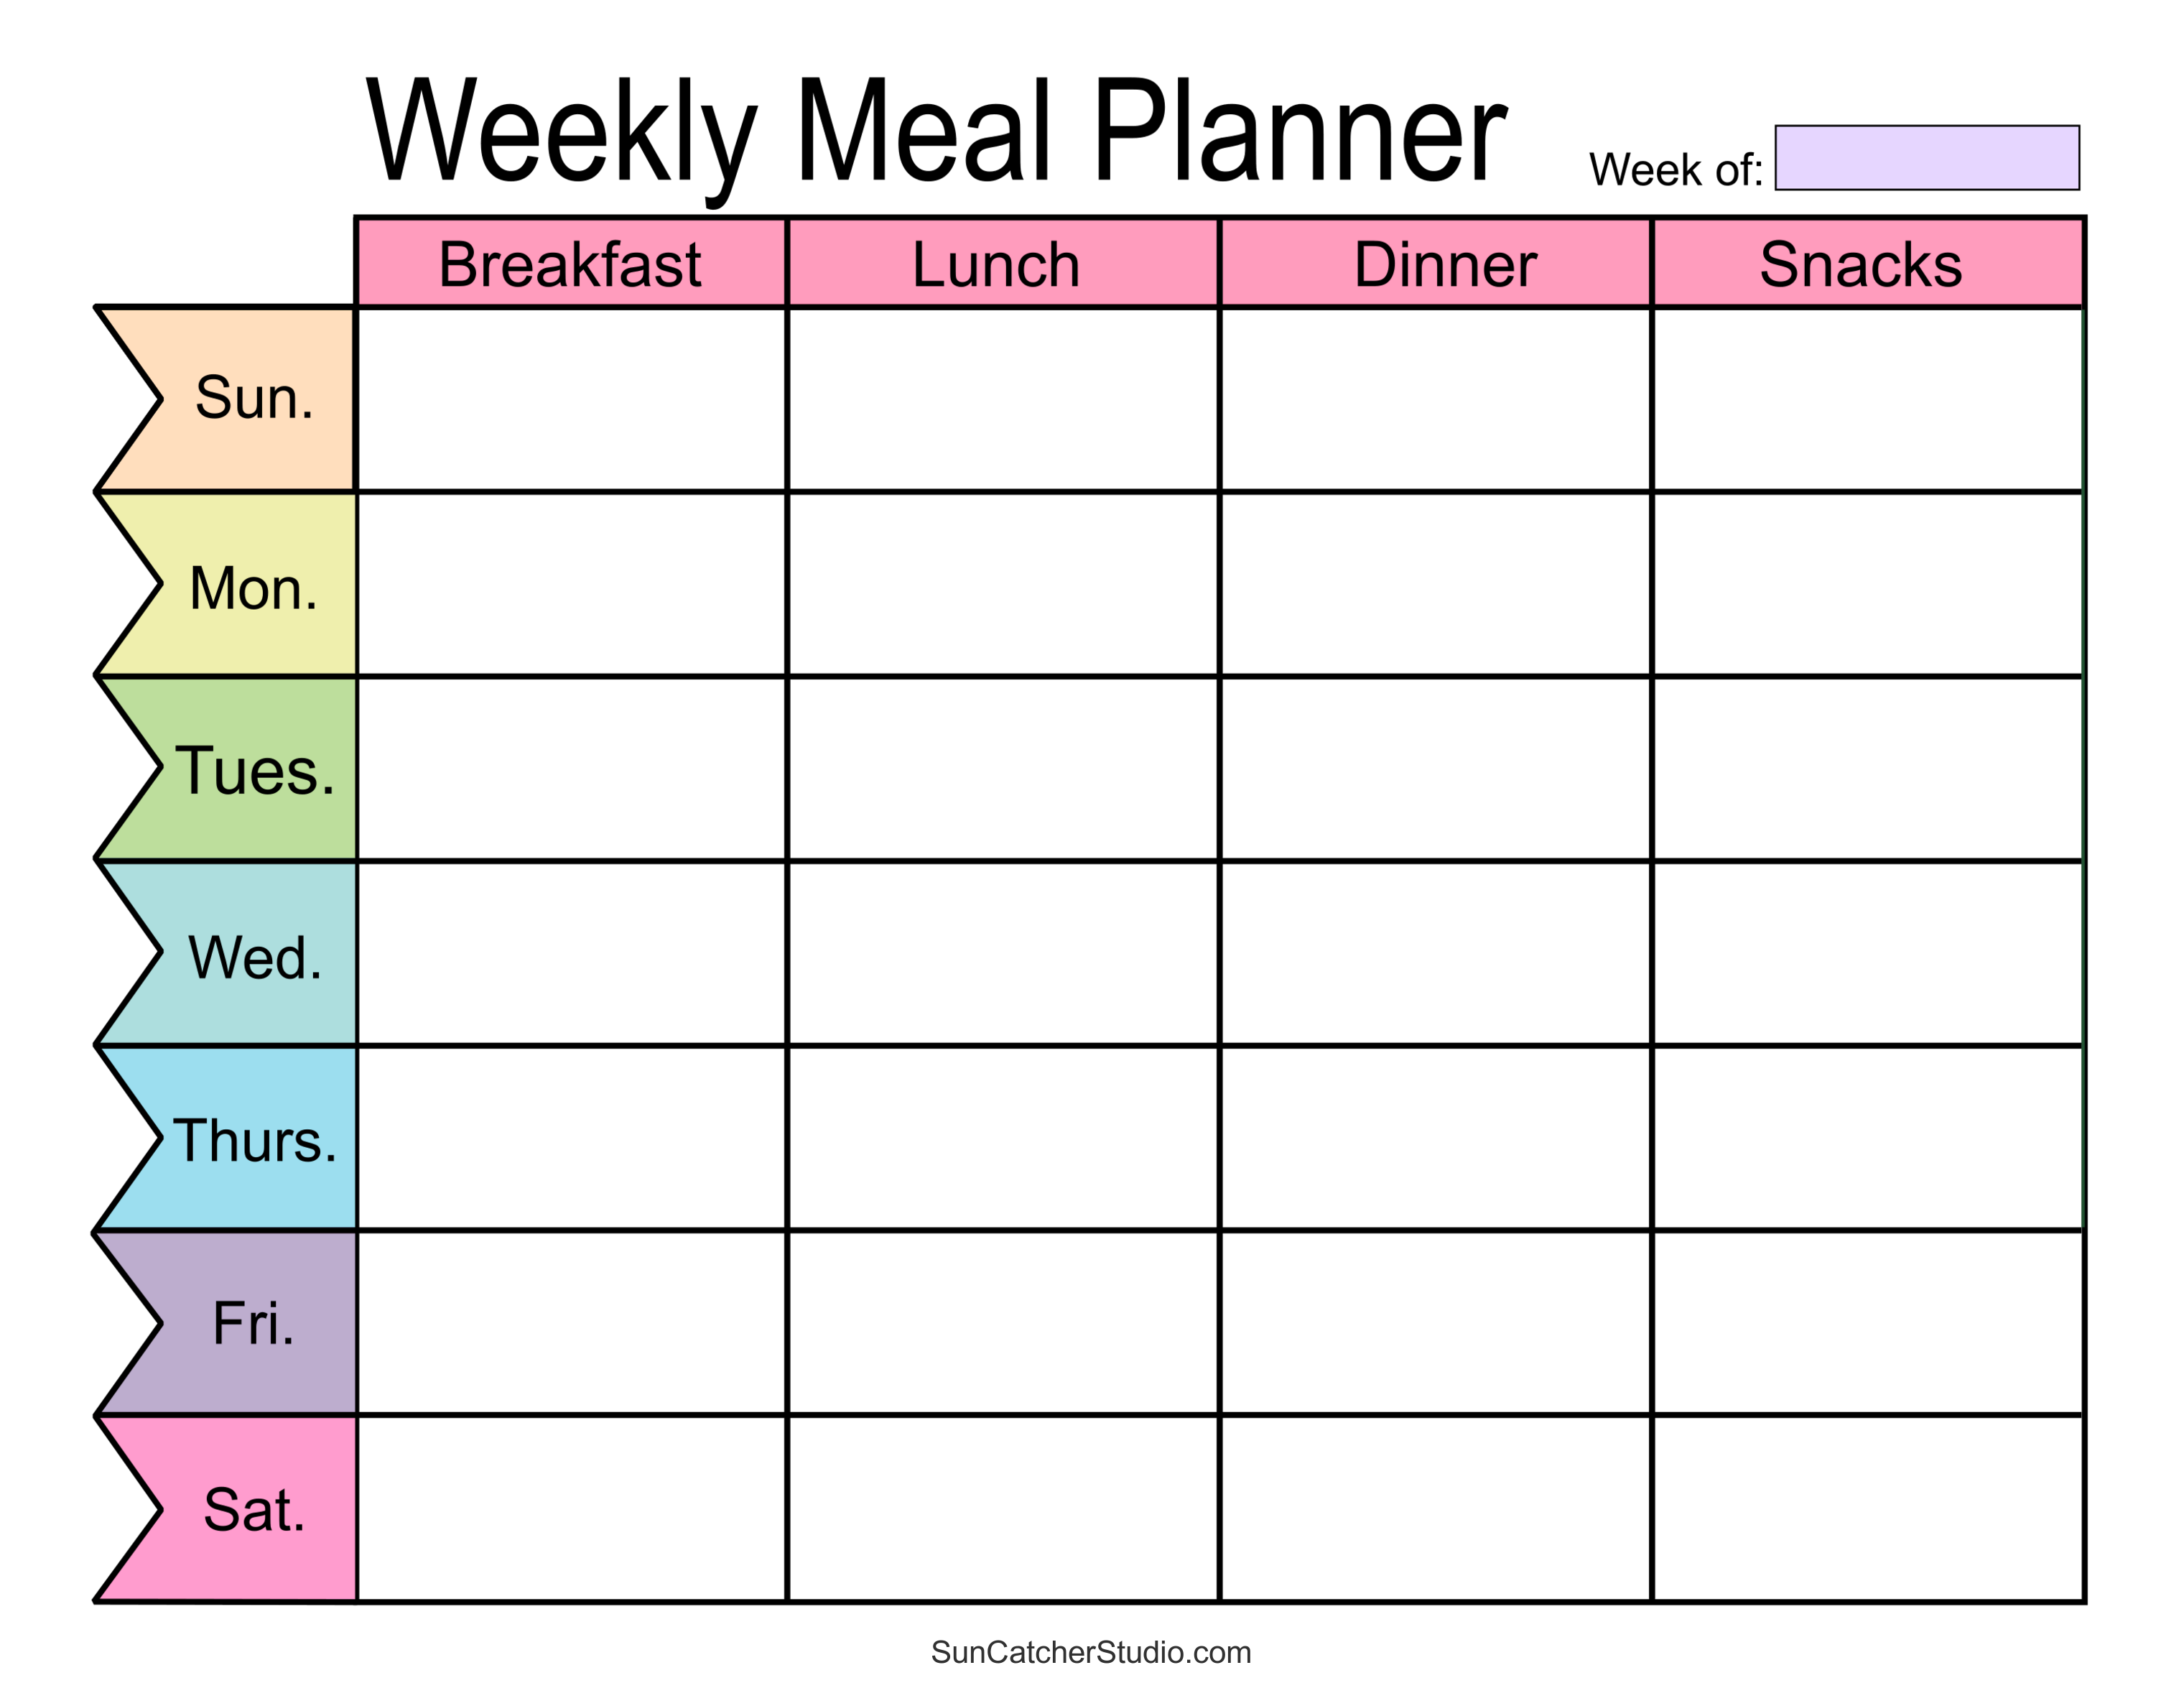 Meal Planners: Printable Weekly Menu Templates (PDF) DIY Projects